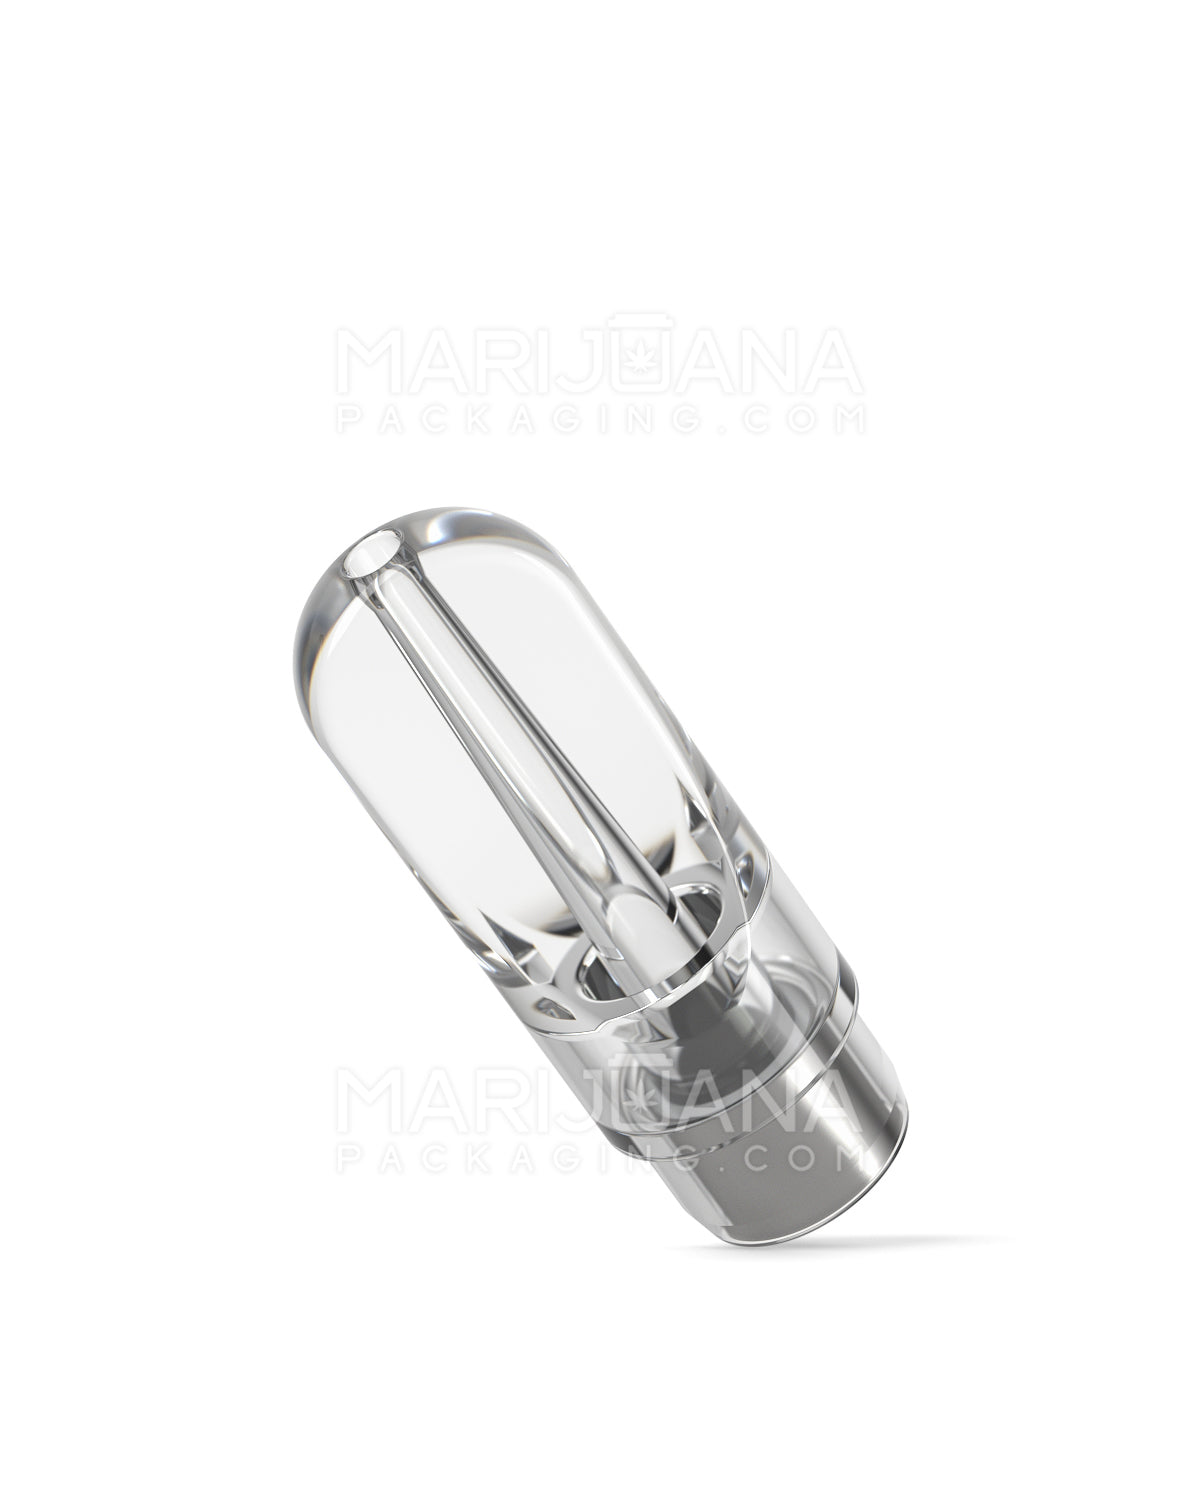 AVD | Flat Vape Mouthpiece for GoodCarts Plastic Cartridges | Clear Plastic - Press On - 600 Count - 4